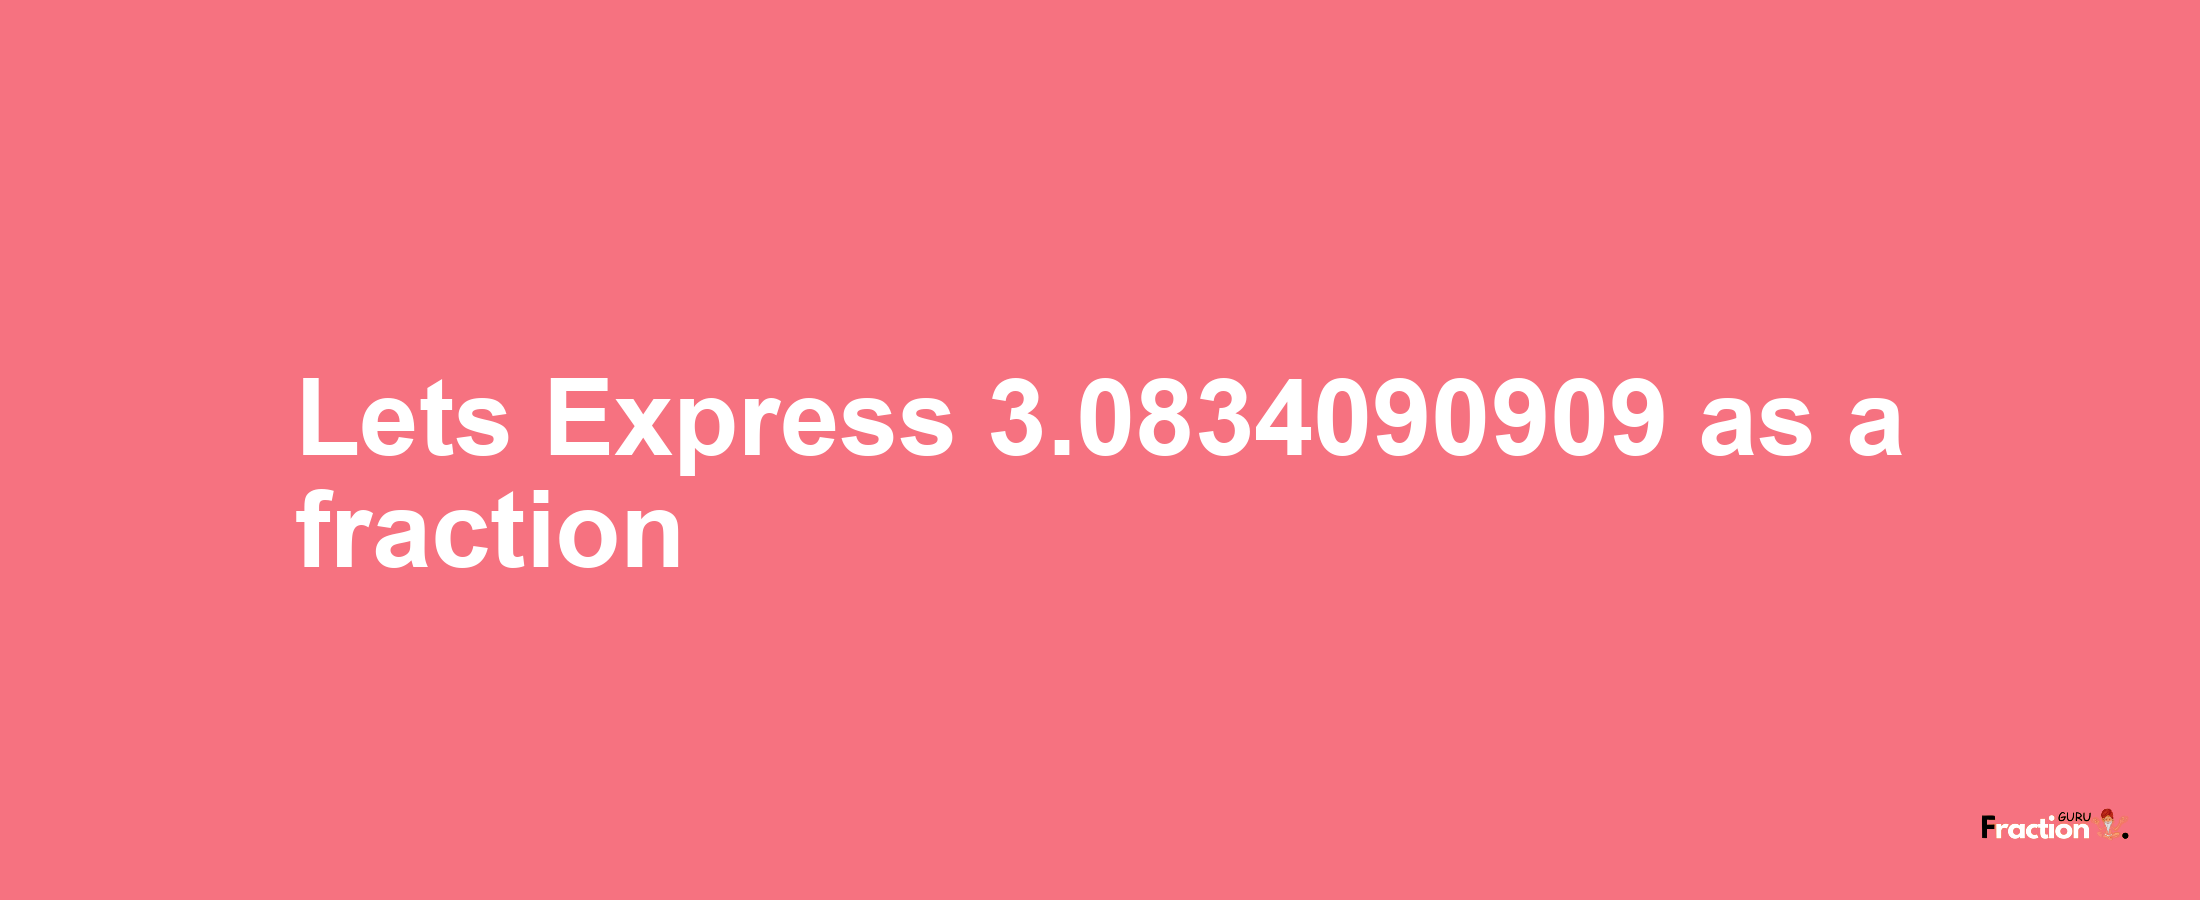 Lets Express 3.0834090909 as afraction